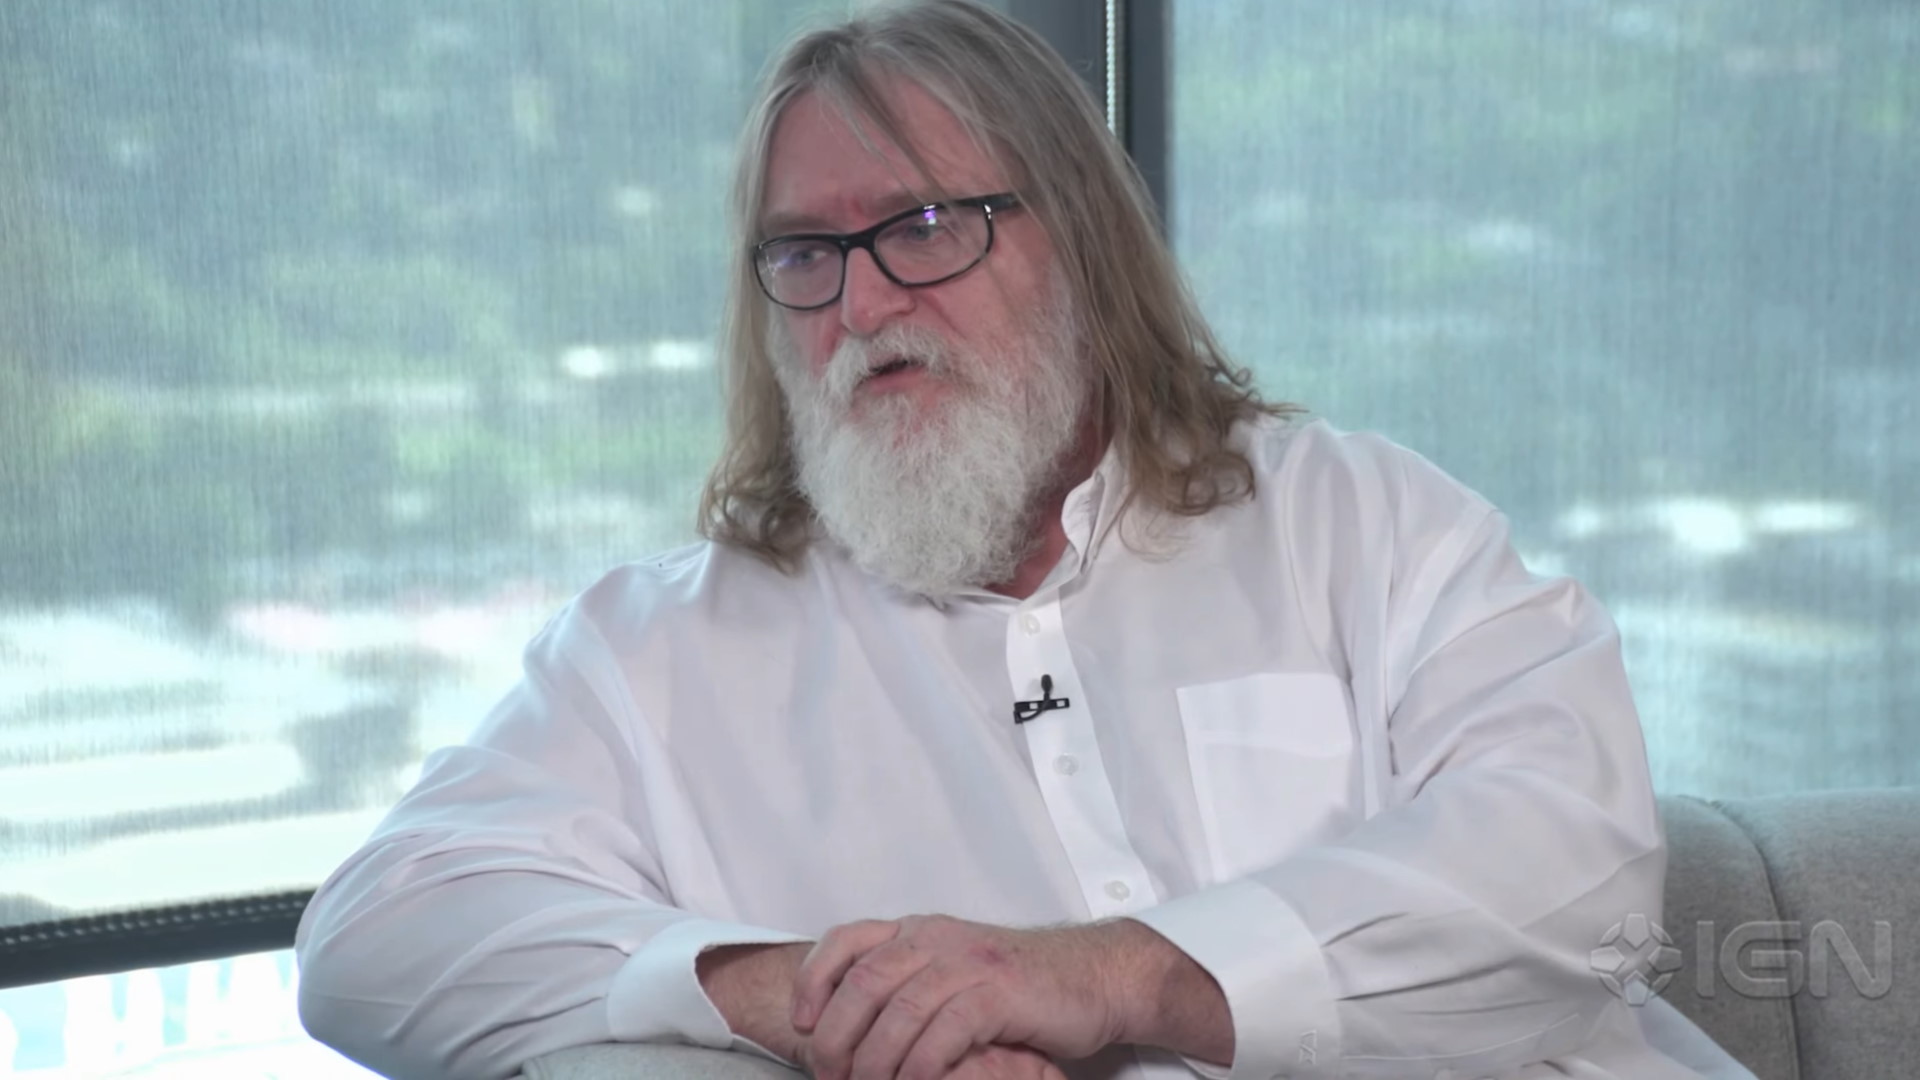  Gabe Newell expects Steam Deck to sell 'millions of units' but the pricing was 'painful' to pick 